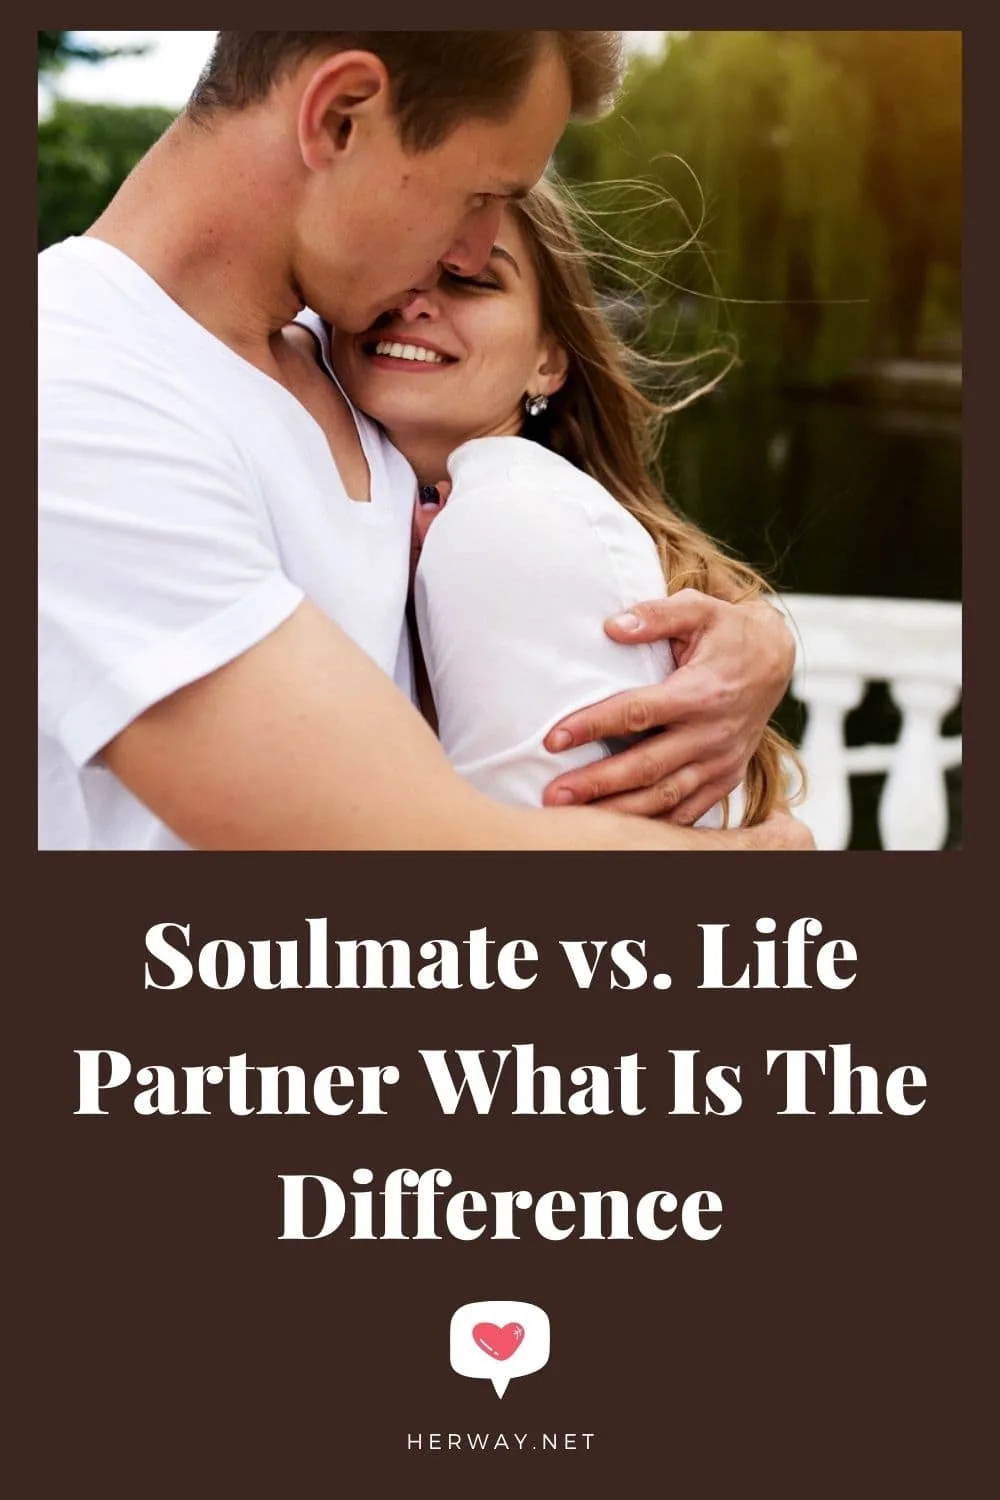 Soulmate vs. Life Partner What Is The Difference